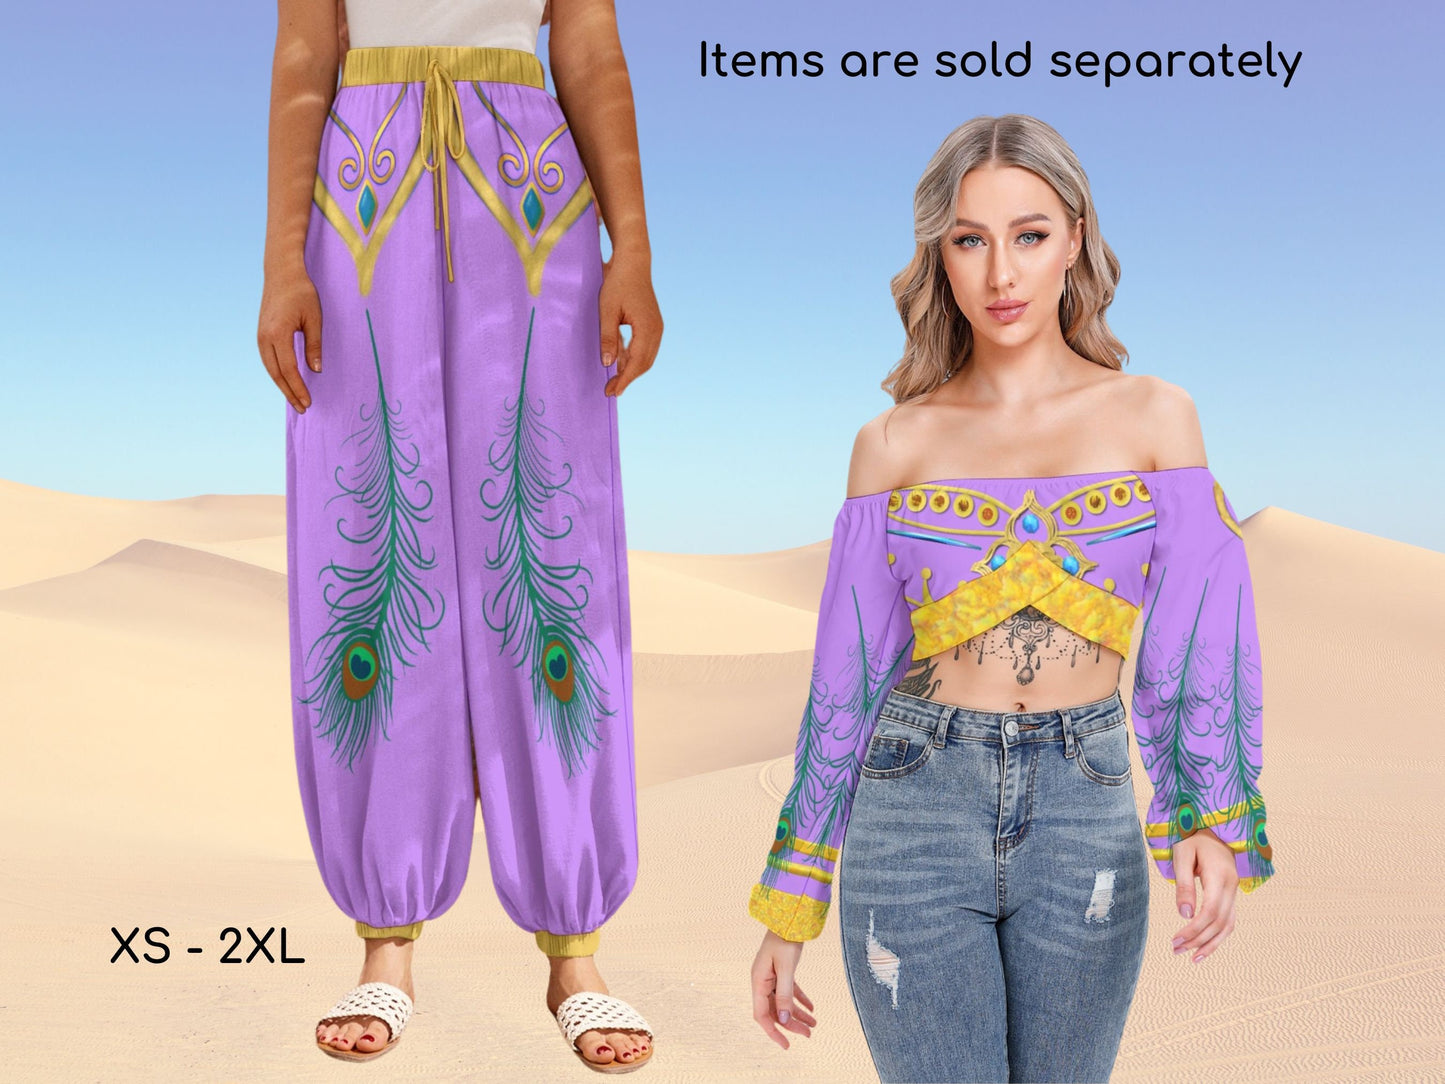 Princess Jasmine Inspired Purple Gold Accents Women's Pants & matchings Tops, Cosplay, Birthday Party, Adult Halloween Costume, Gift for Her